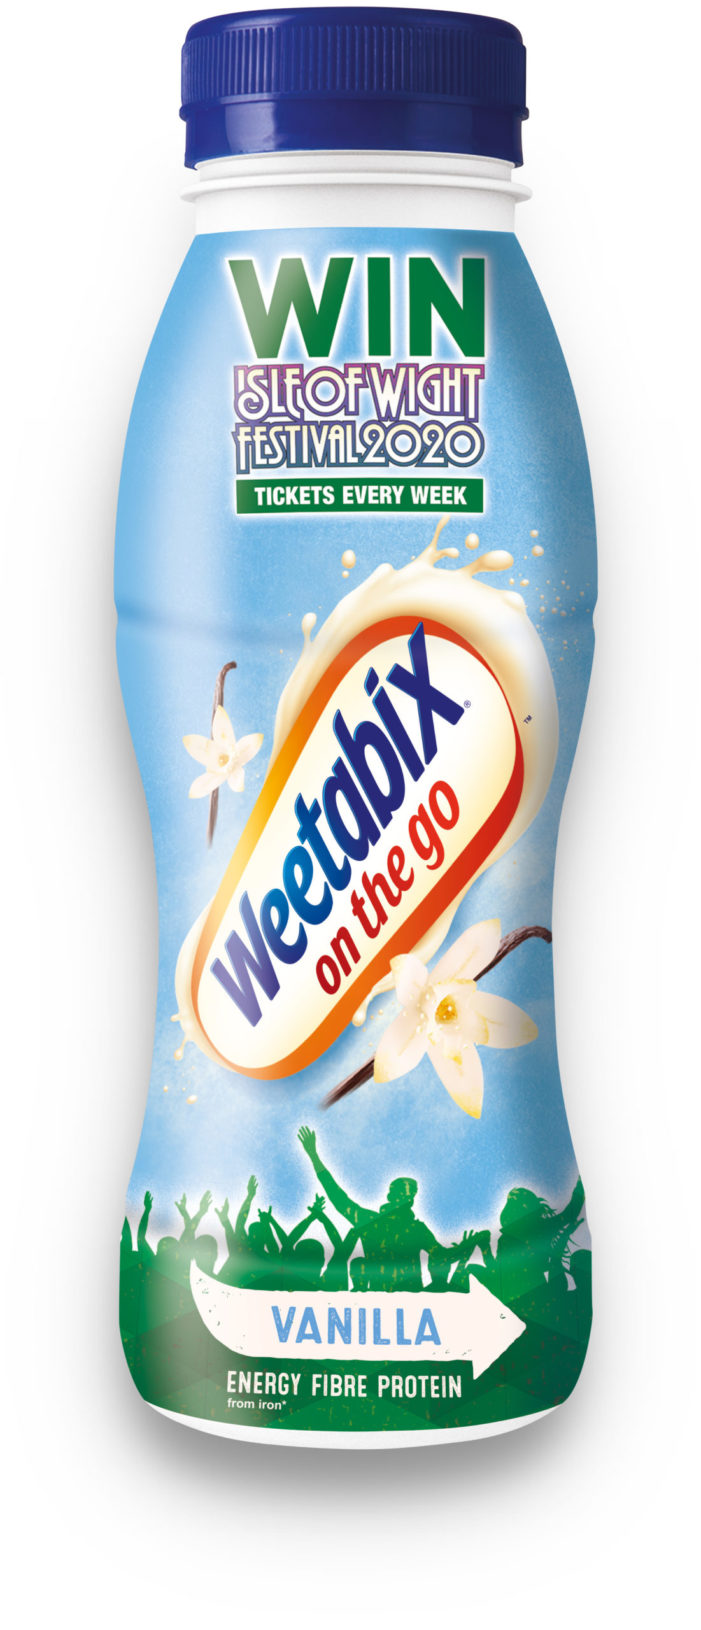 WEETABIX ON THE GO PARTNERS WITH THE ISLE OF WIGHT FESTIVAL FOR A NEW ON-PACK GIVEAWAY